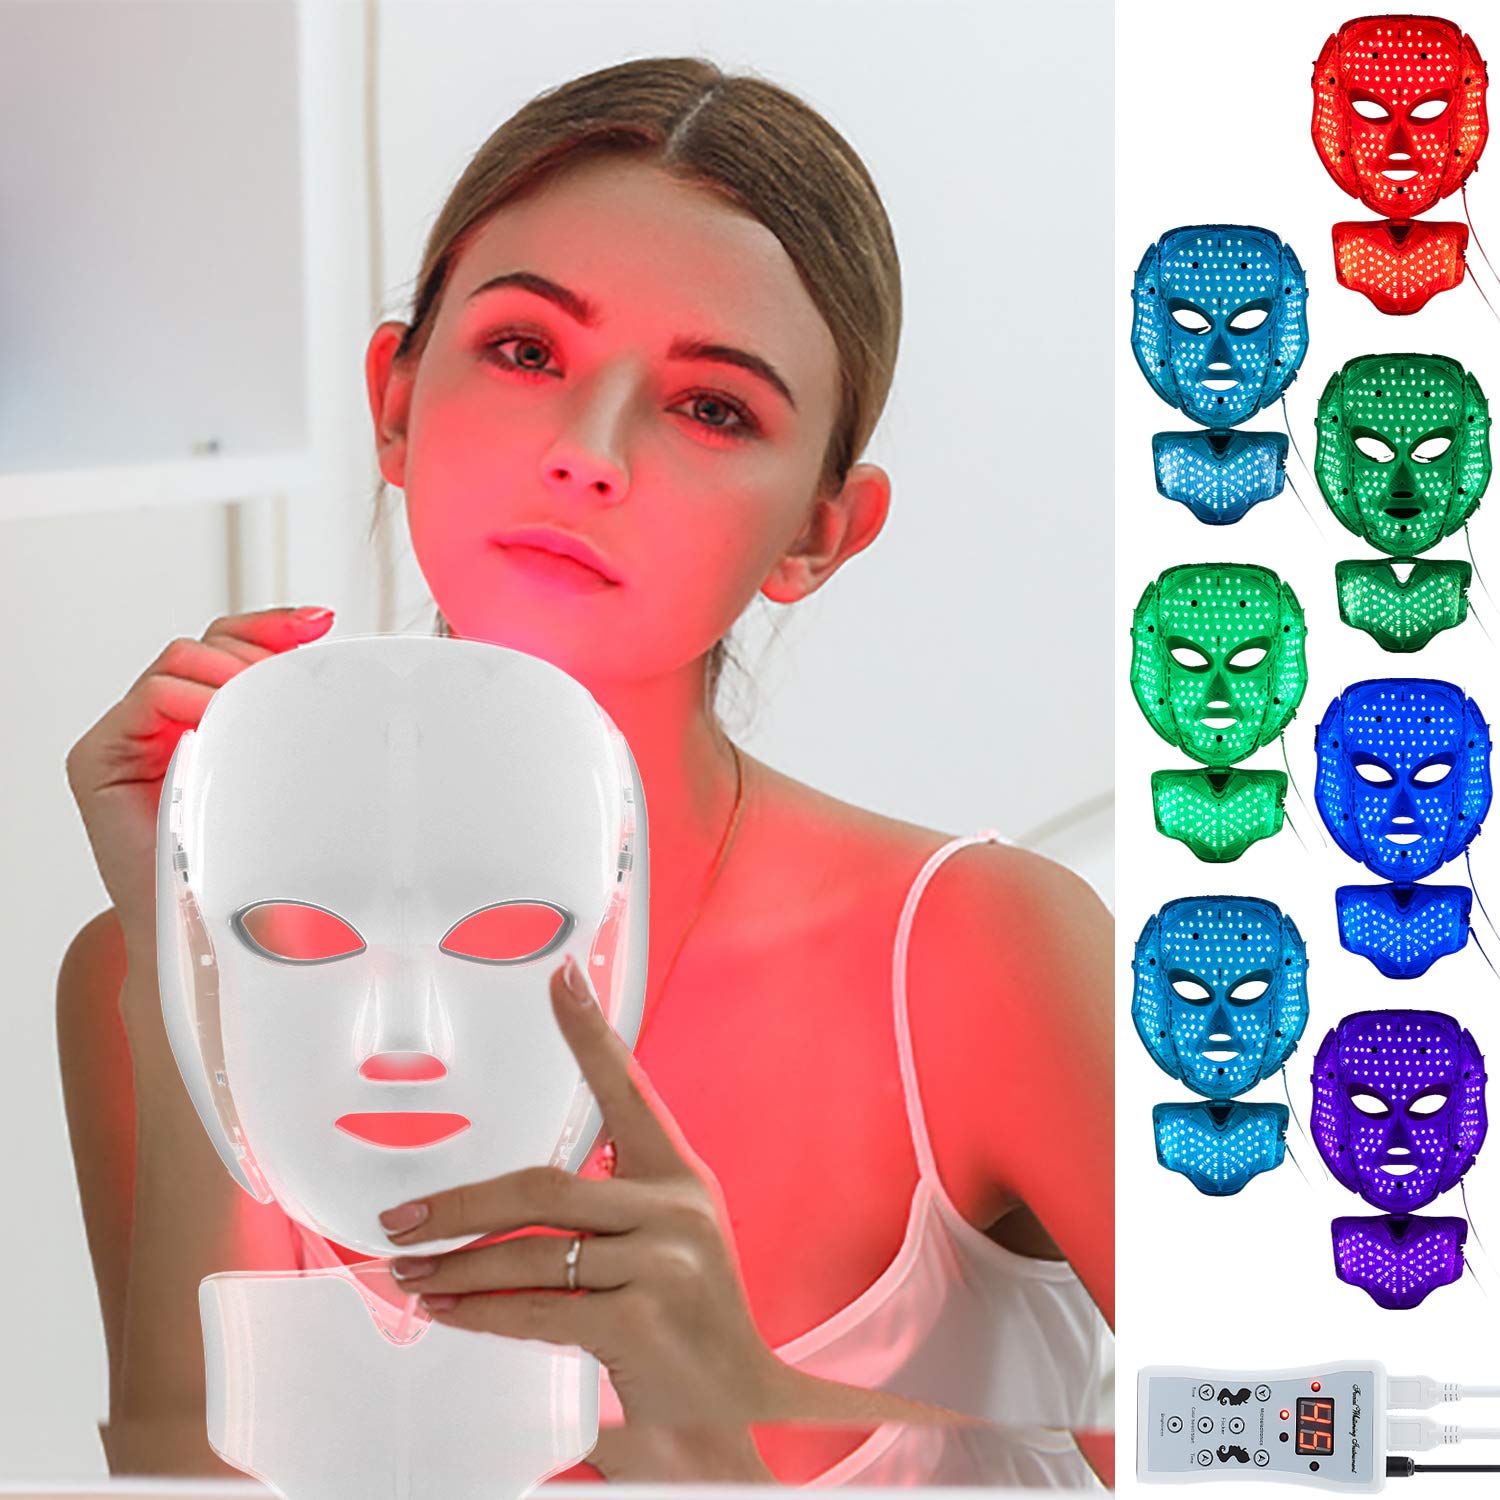 LED Face Mask - 7 Color LED Light Therapy Mask - FDA Approved